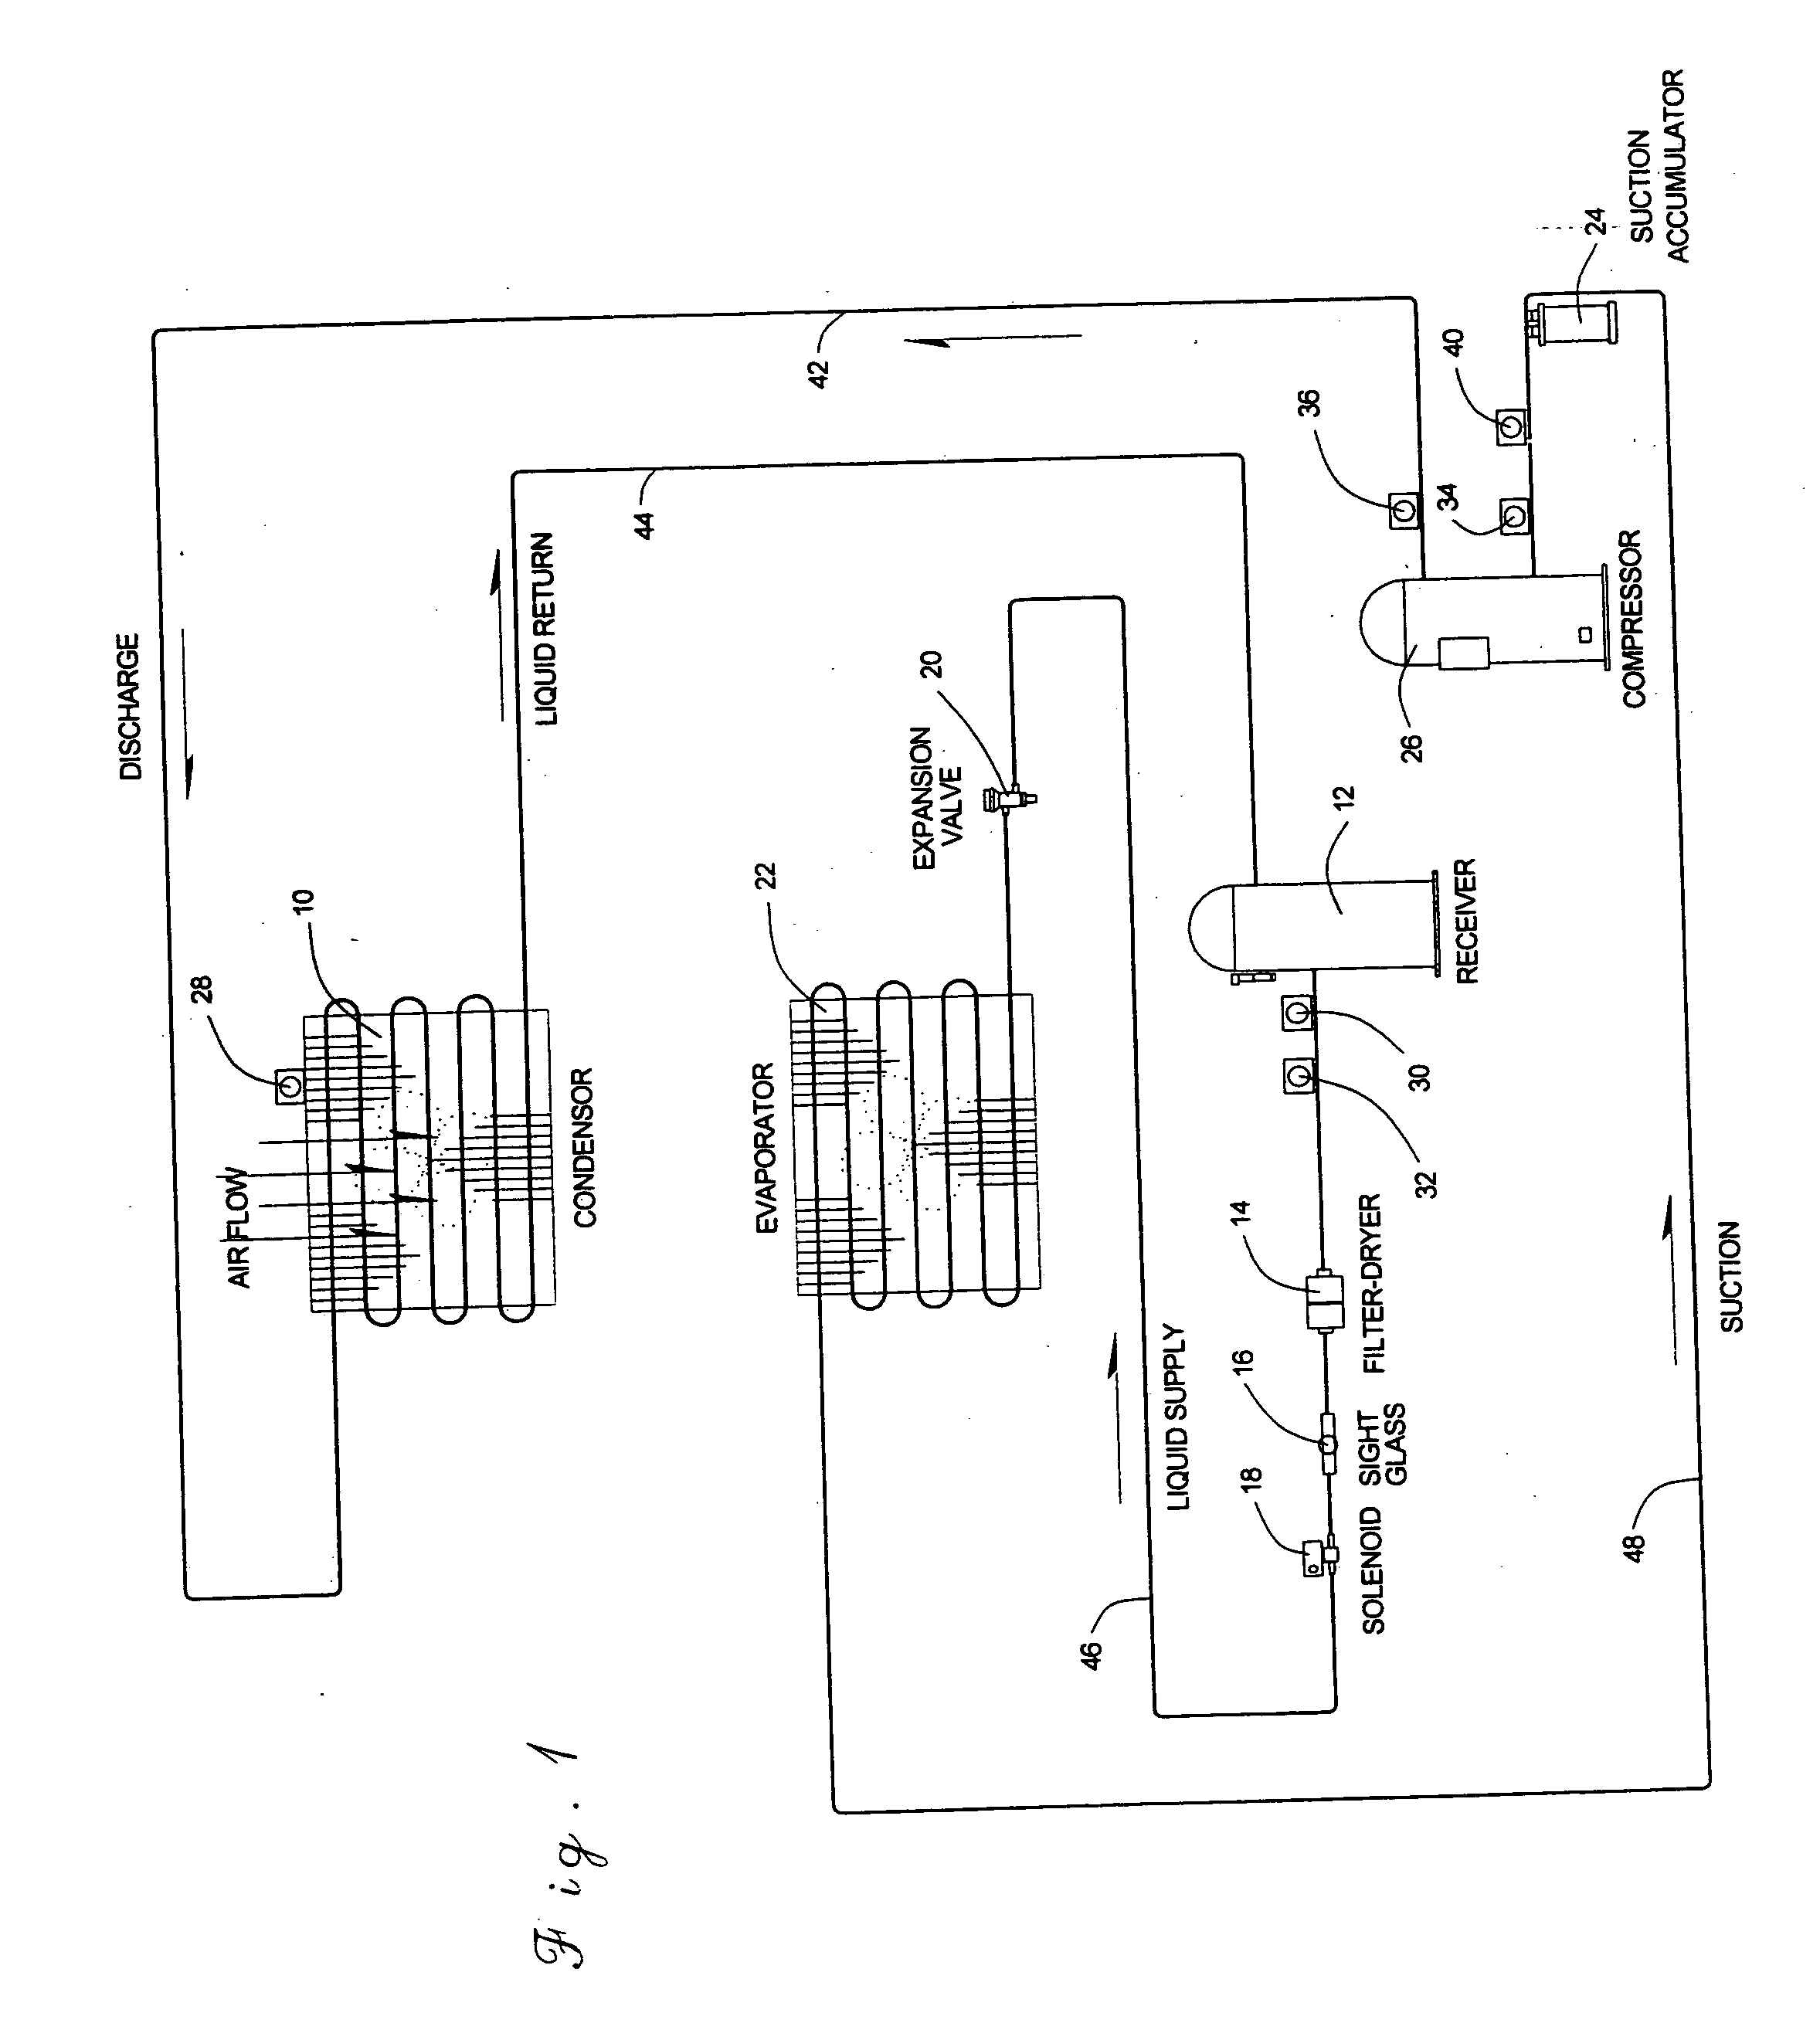 Refrigeration mechanical diagnostic protection and control device